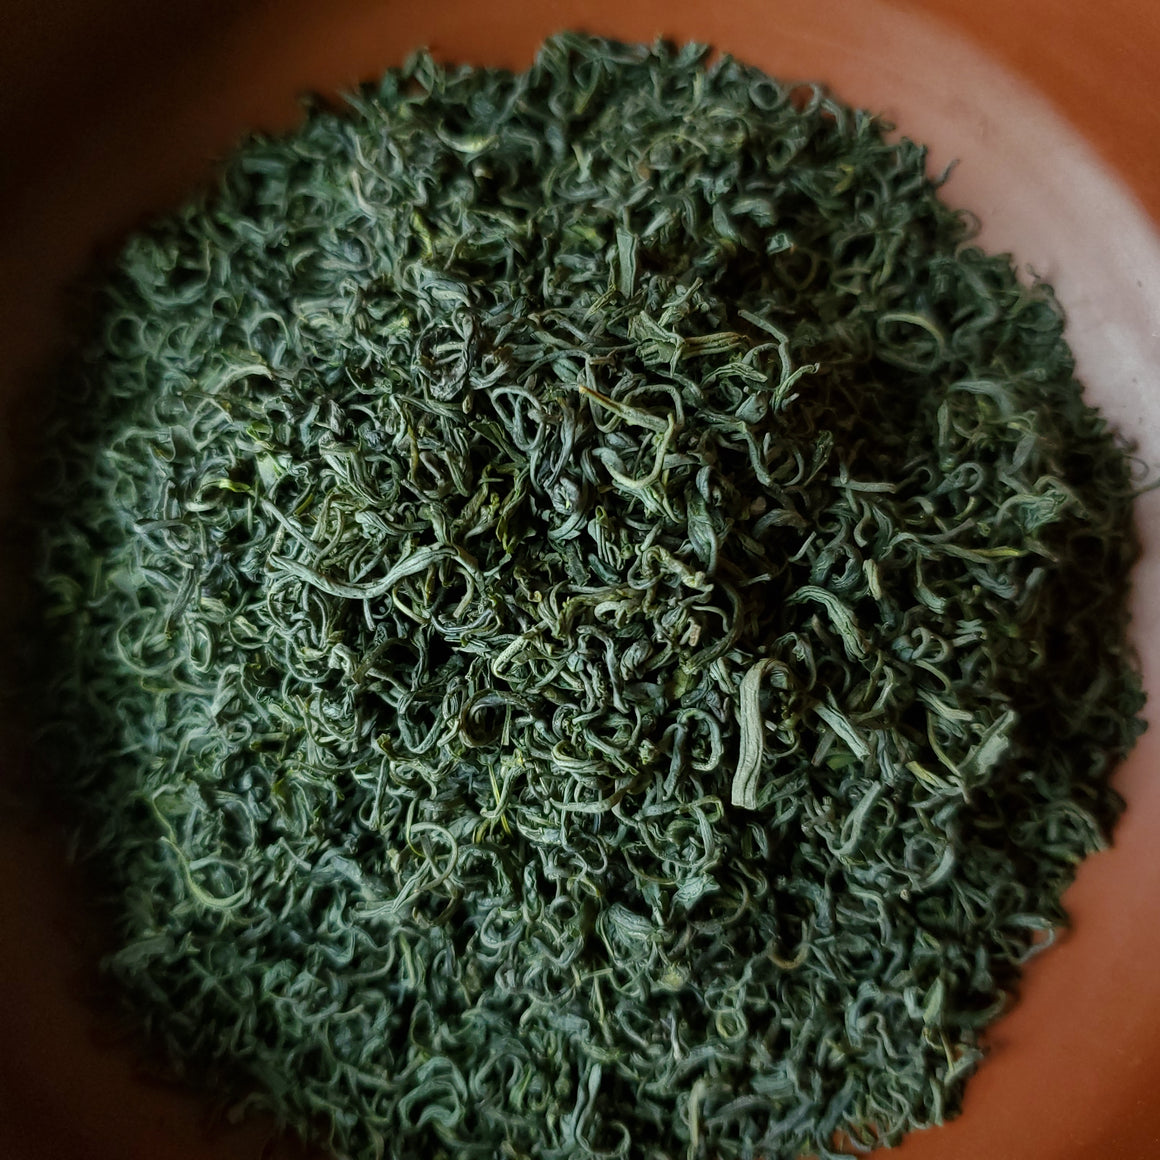 Green Tea of the Clouds, $18.99/2oz